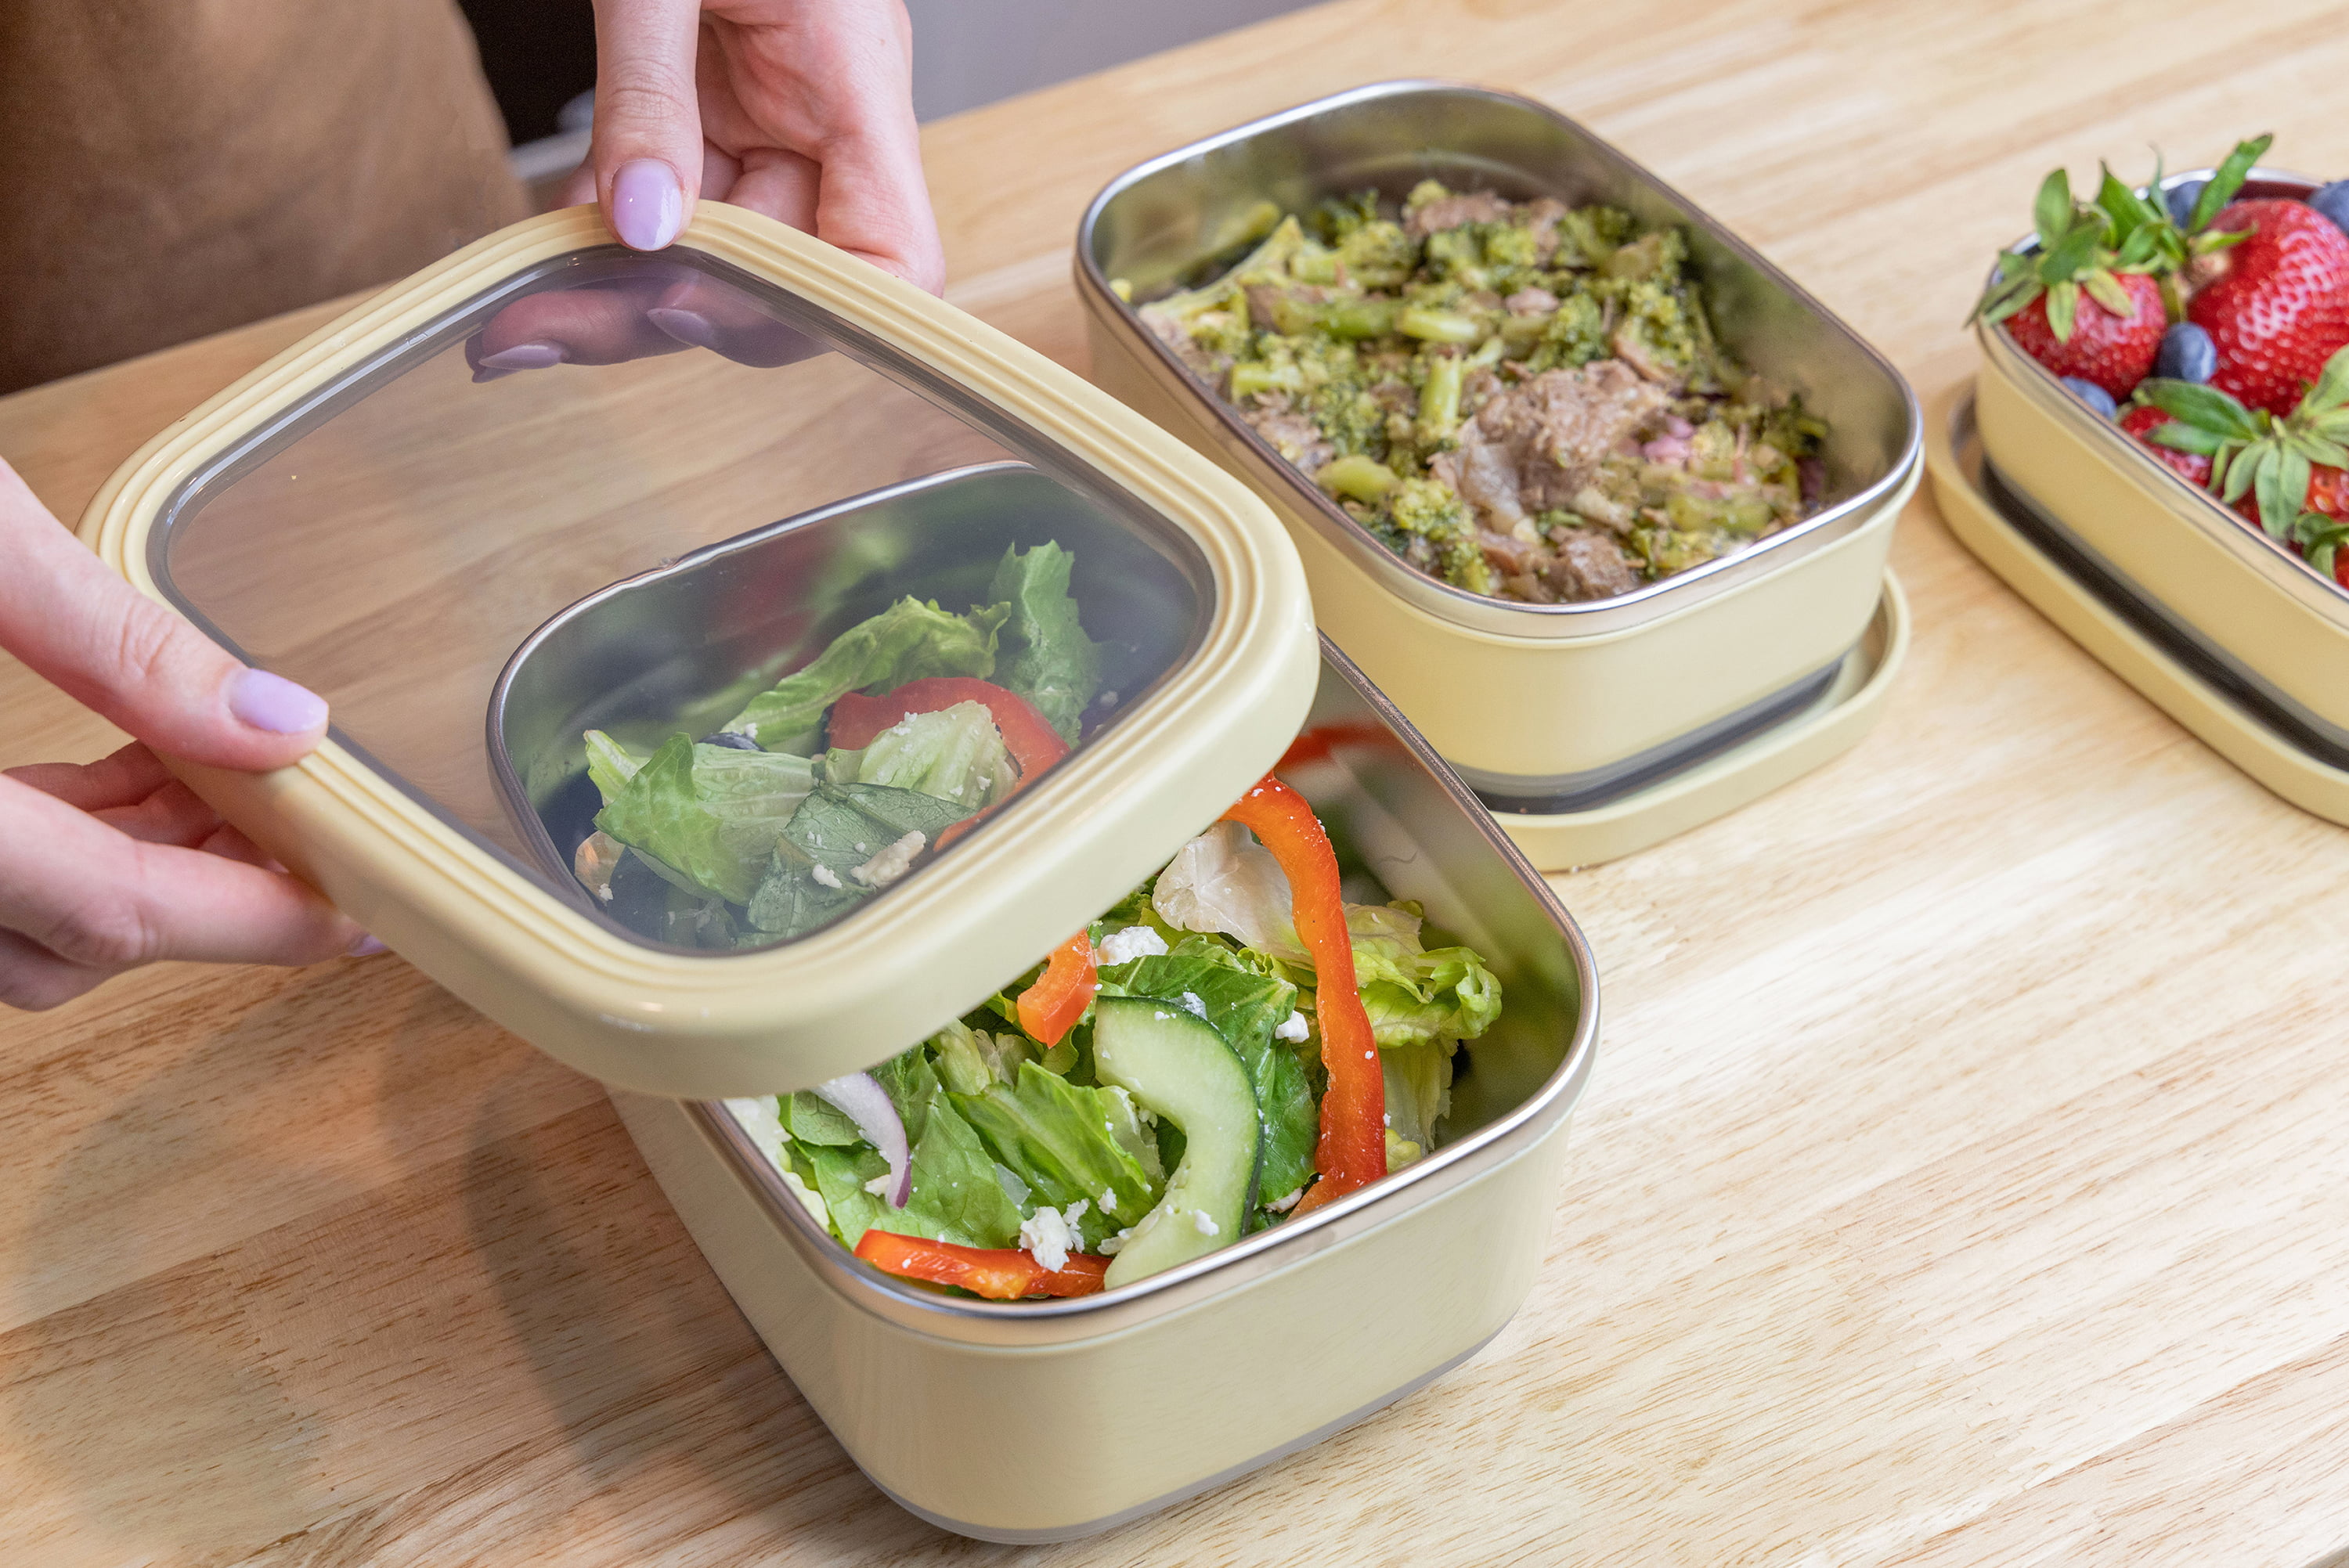 MIRA Rectangle Container with Divider – MIRA Brands